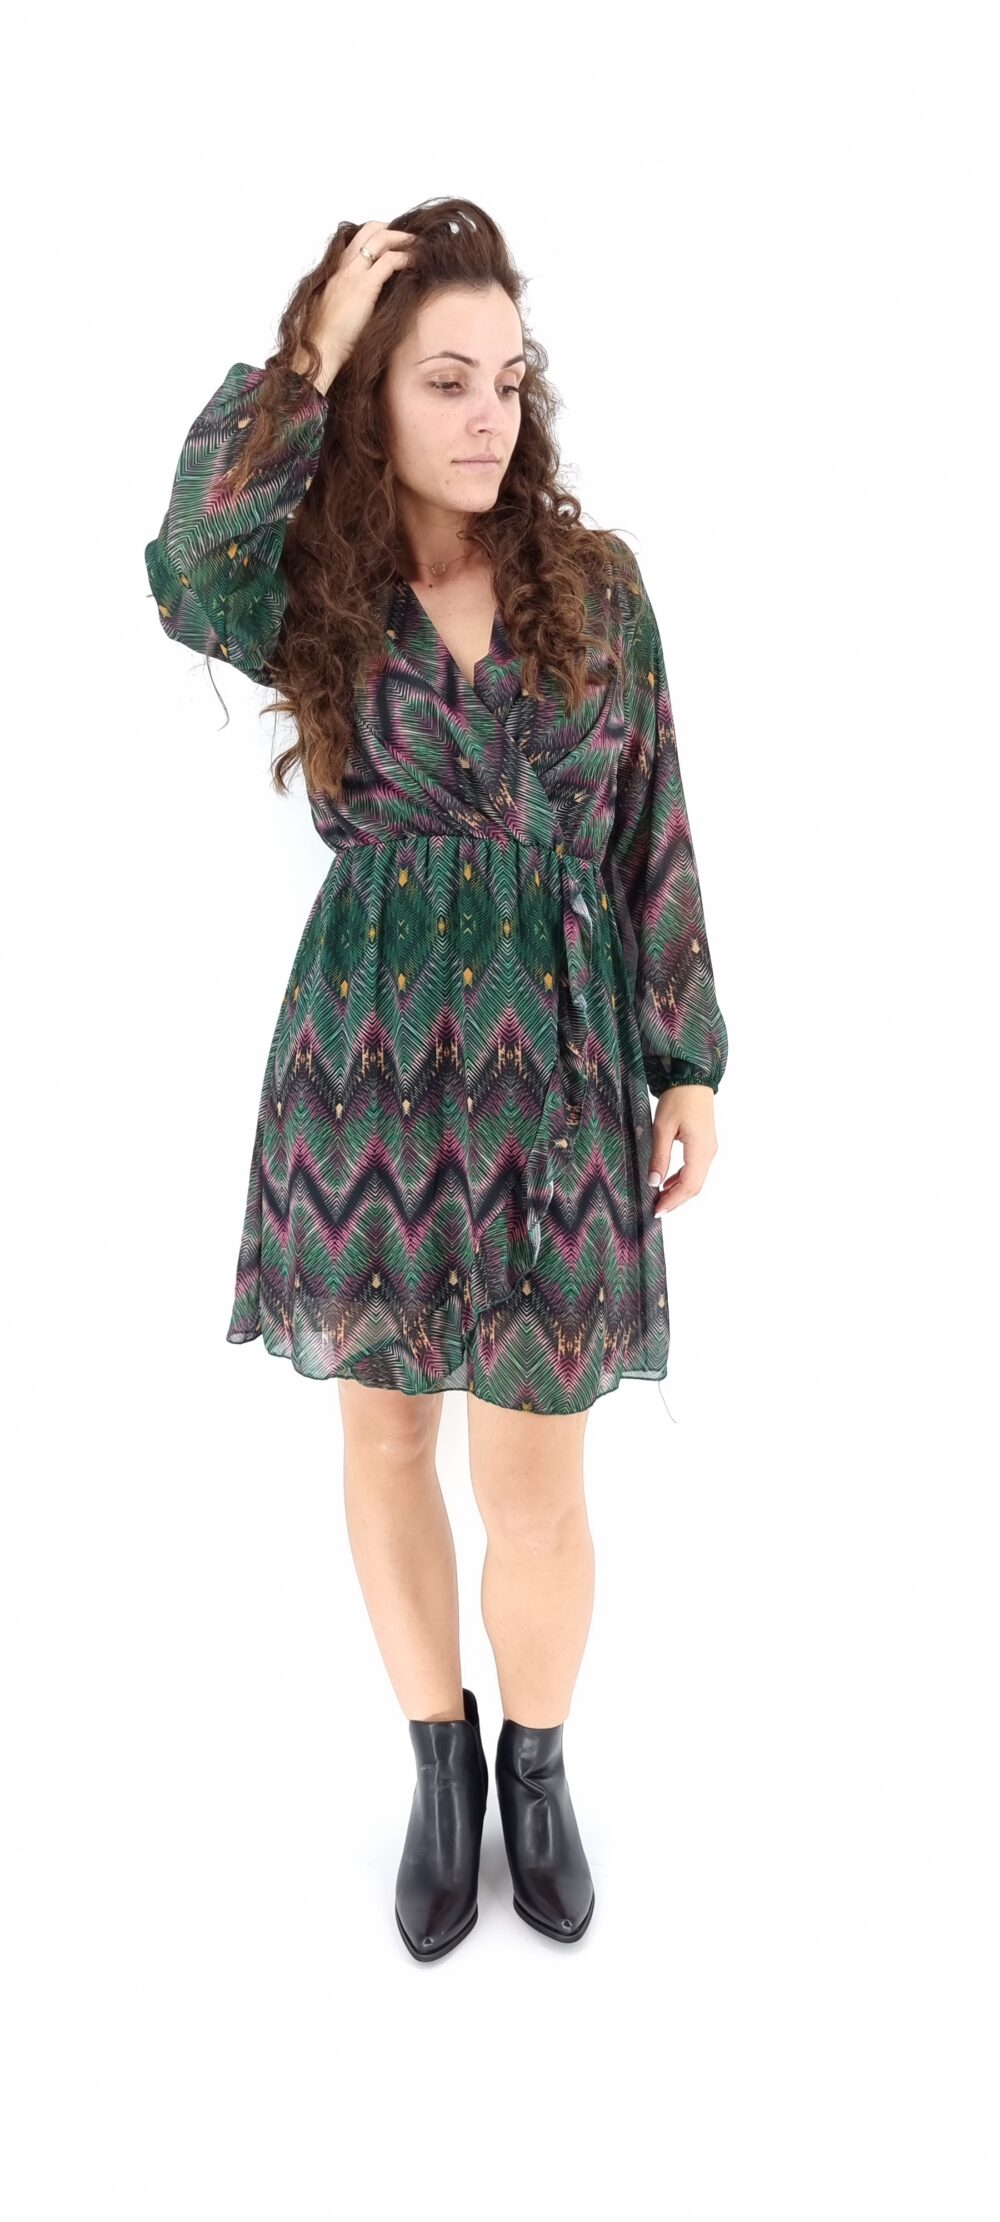 Short cruise dress with colorful pattern in green shades